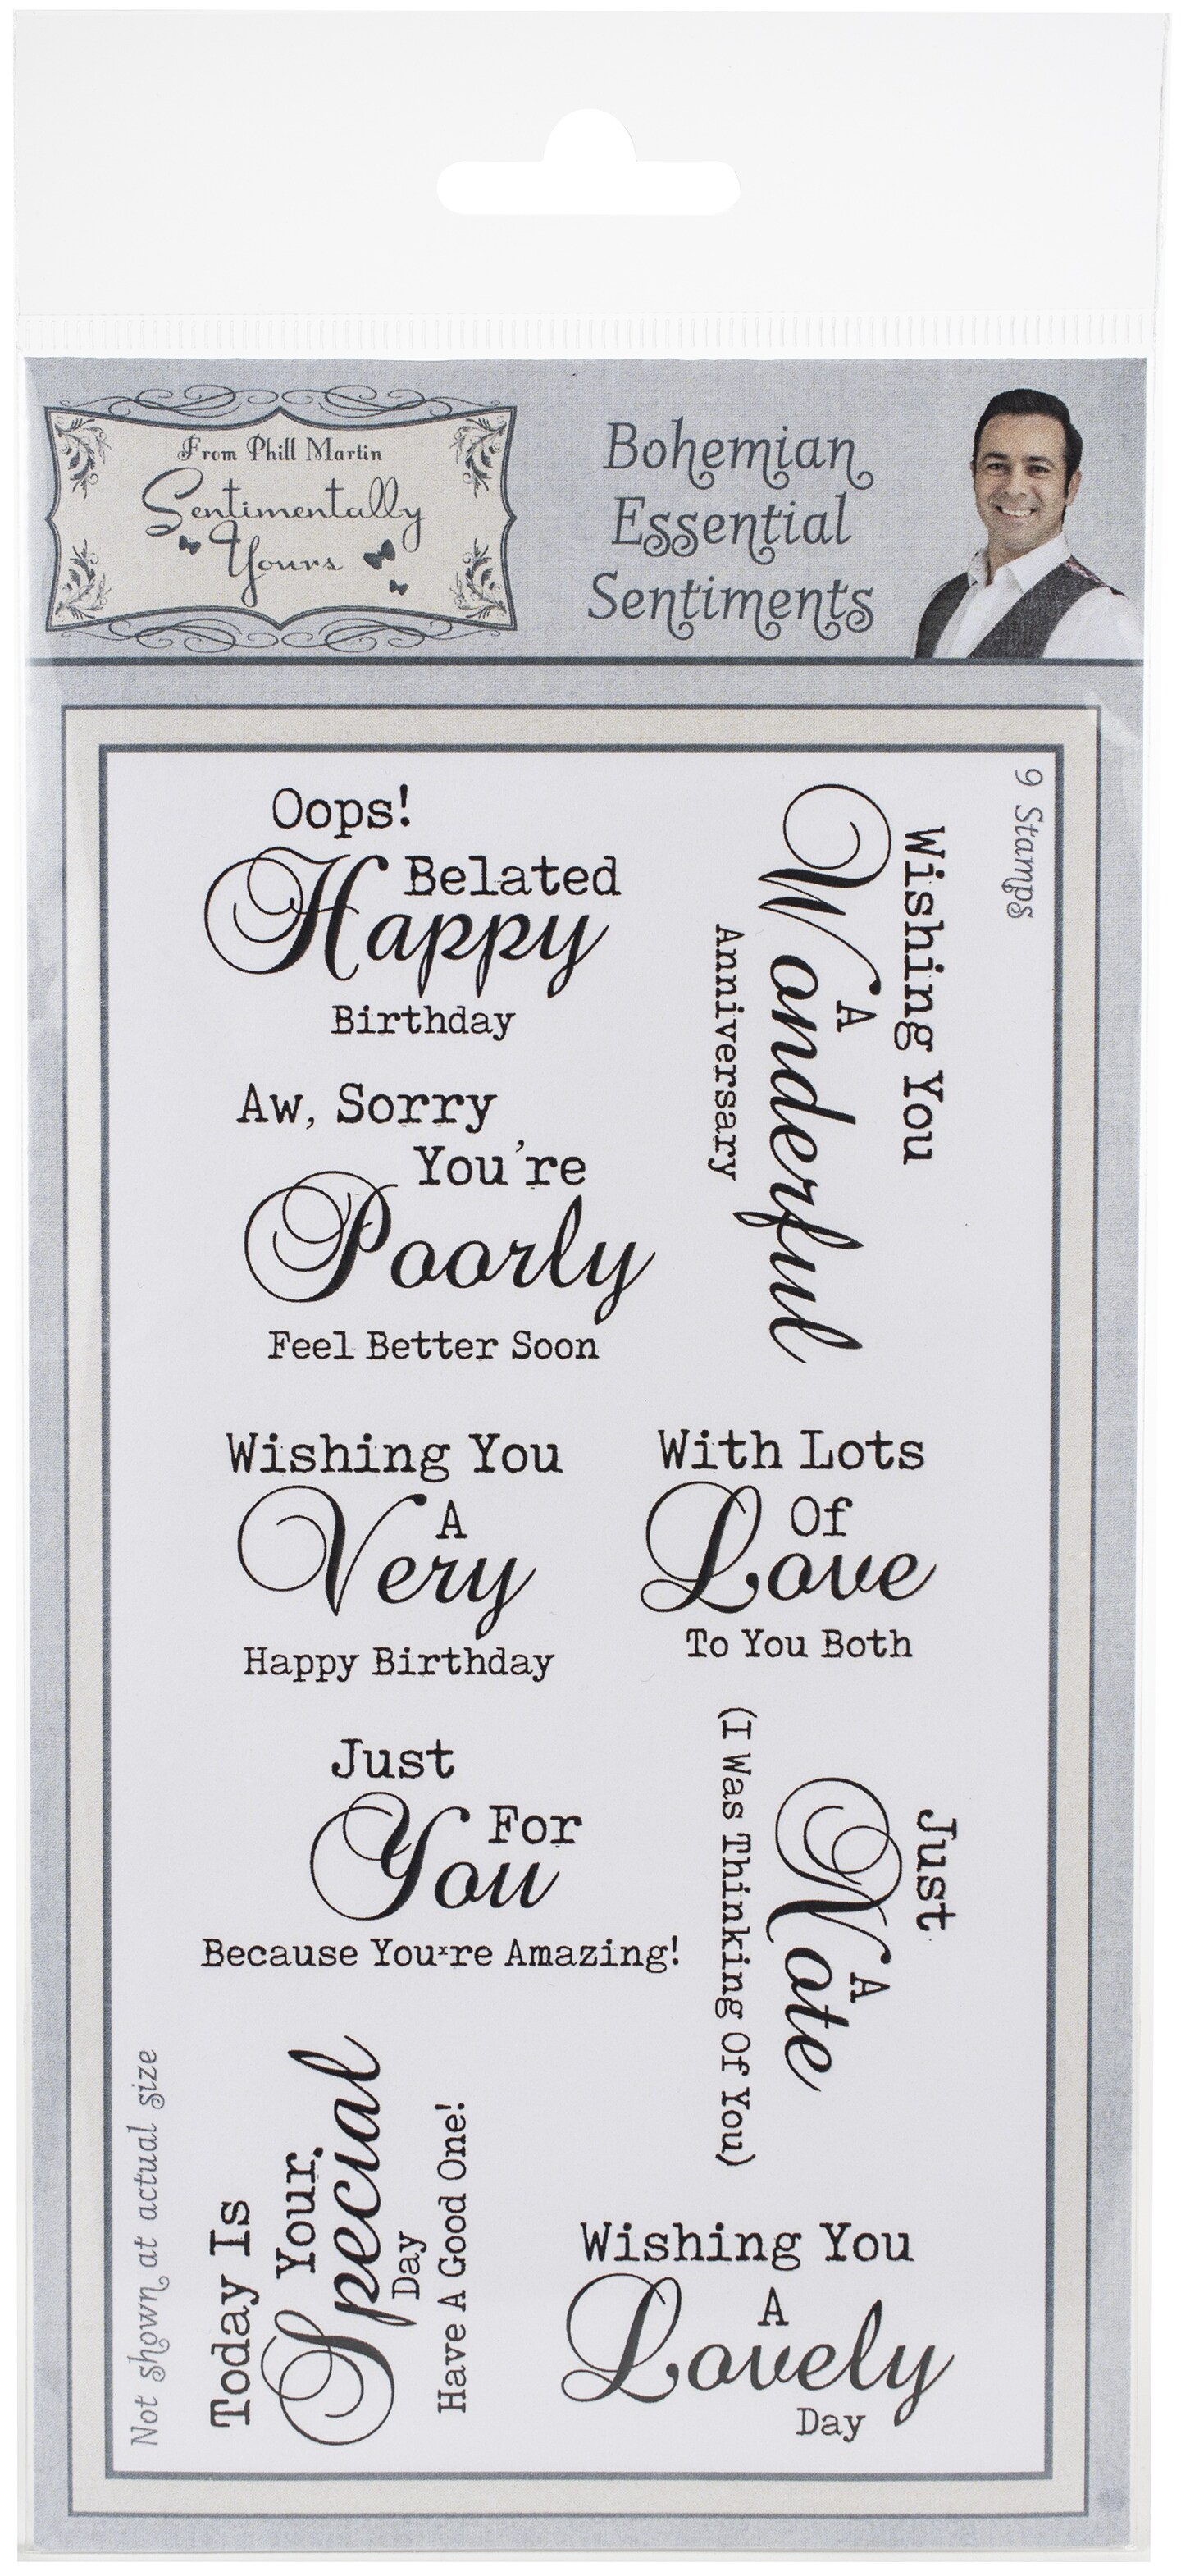 Sentimentally Yours By Phill Martin DL Clear Stamps-Bohemian Essential Sentiments